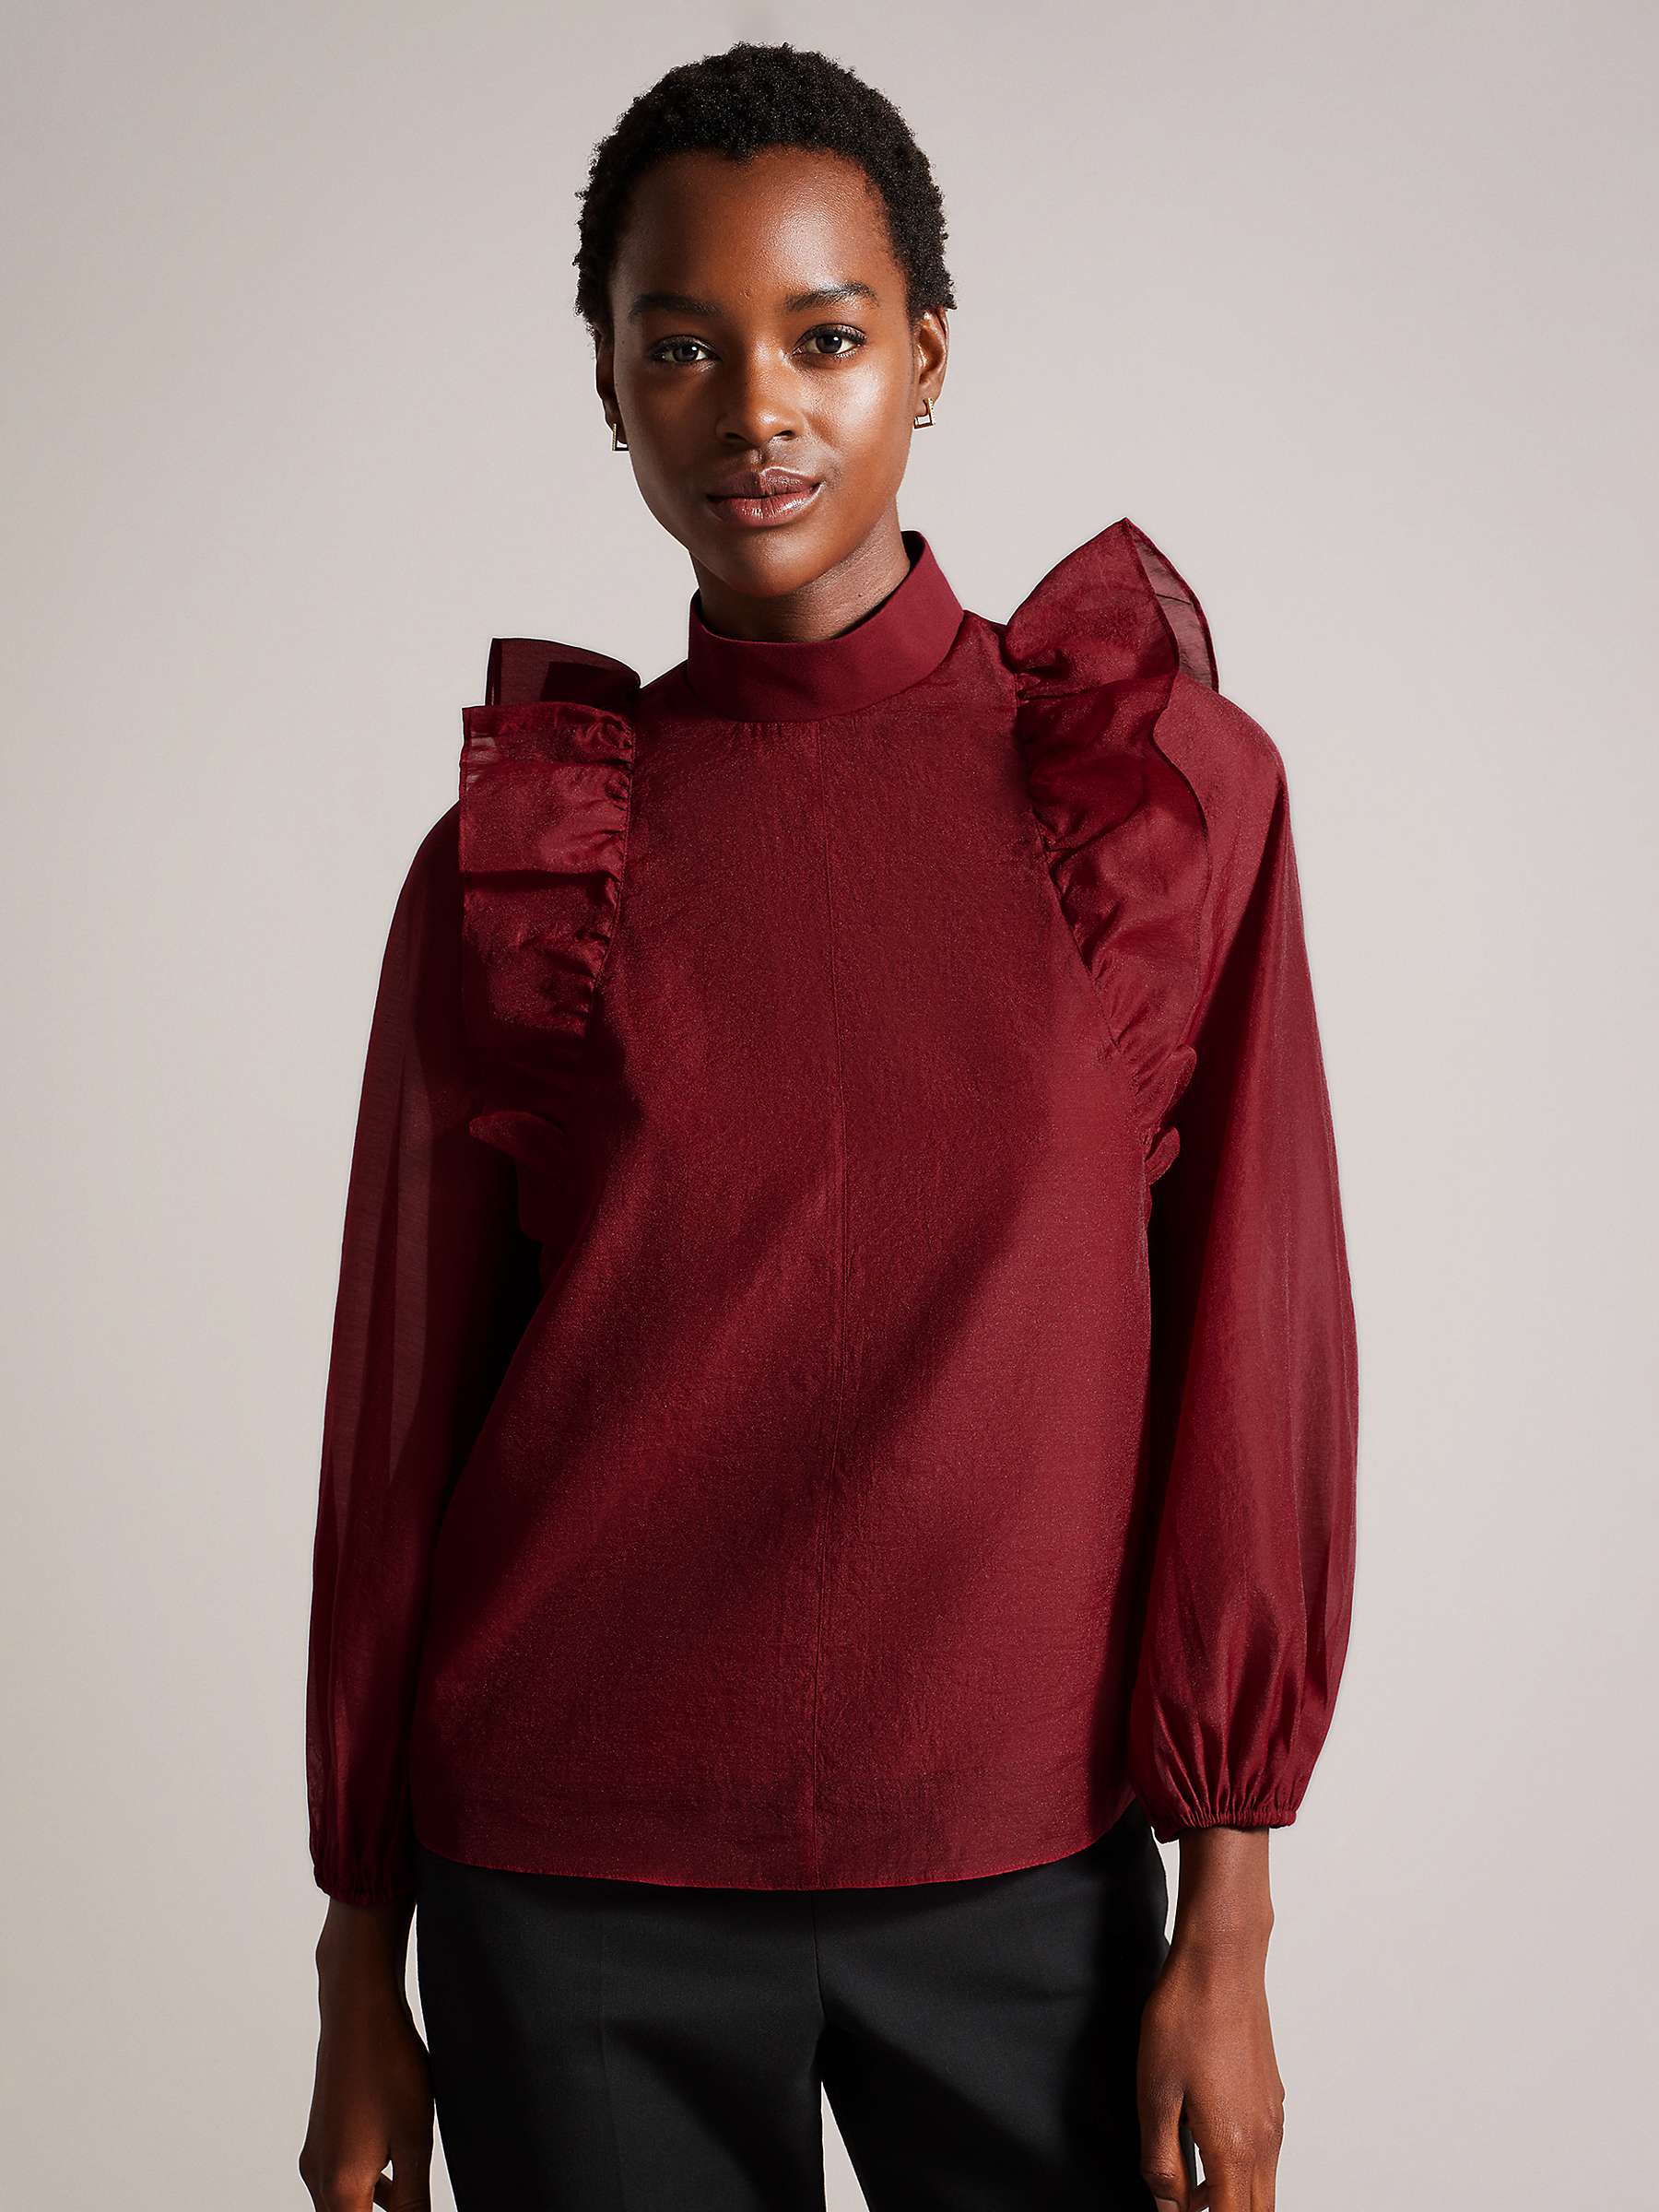 Buy Ted Baker Aubreei Knit Rib Collar Balloon Sleeves Top Online at johnlewis.com